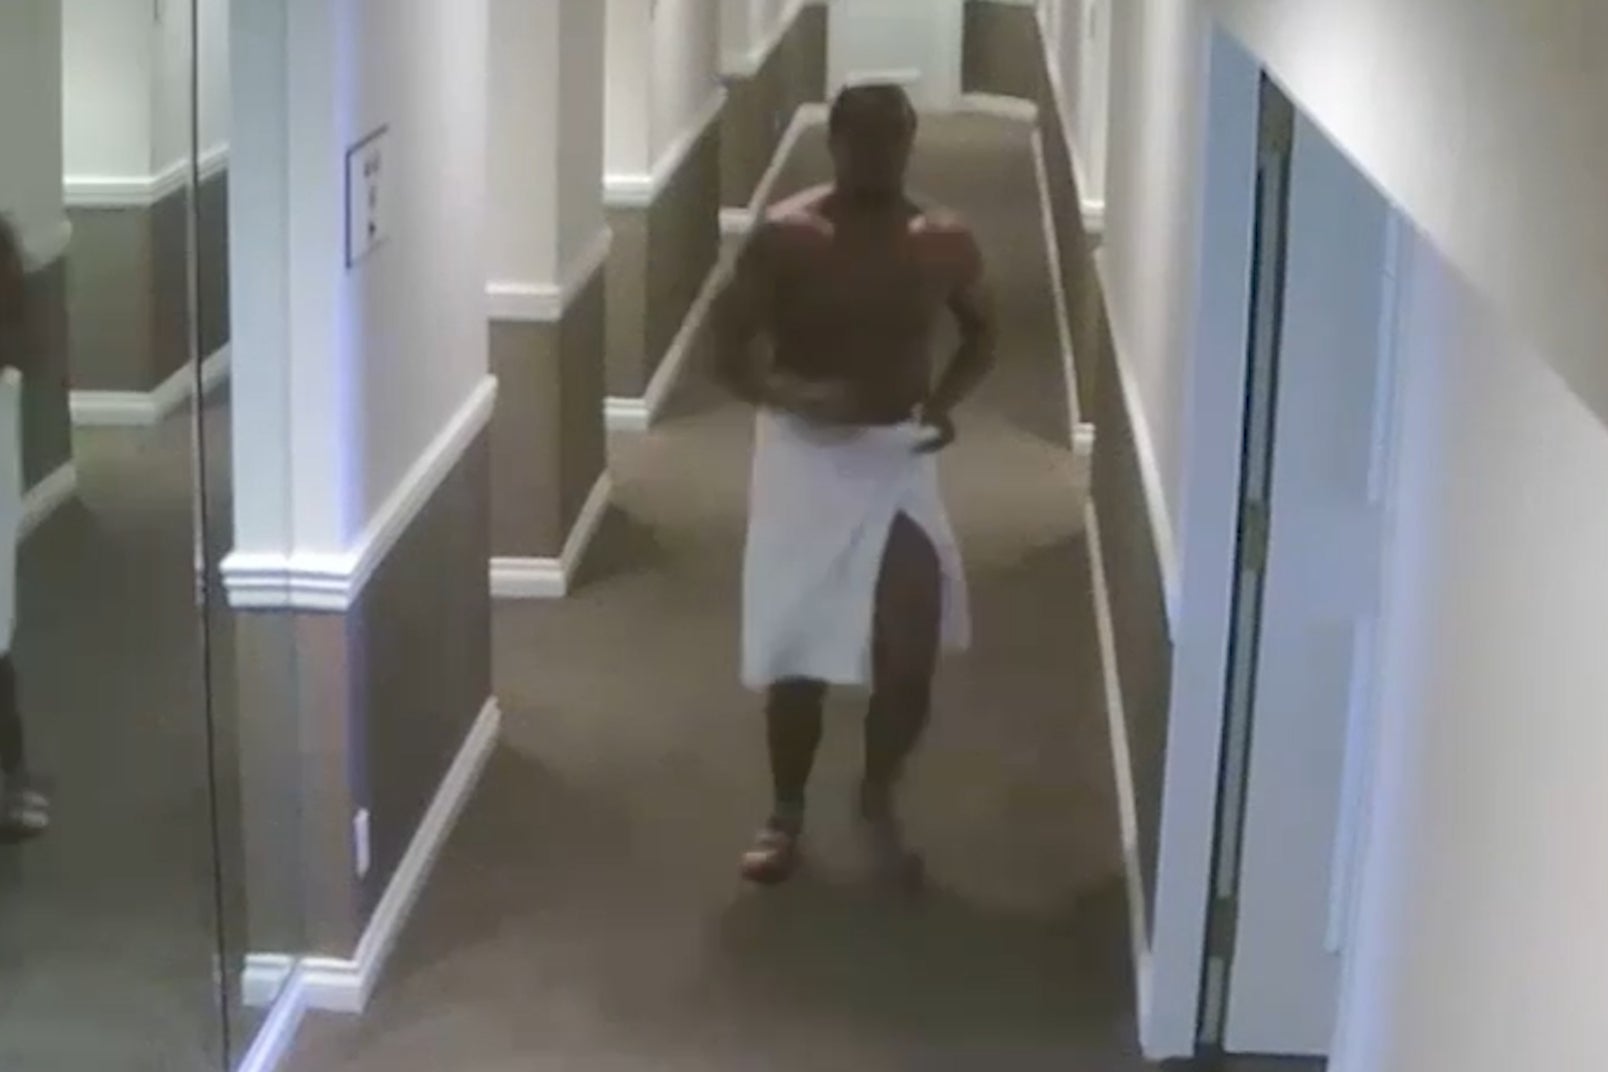 Combs is seen in a towel chasing Ms Ventura down the corridor towards the elevators, where he attacks her and pushes her to the floor